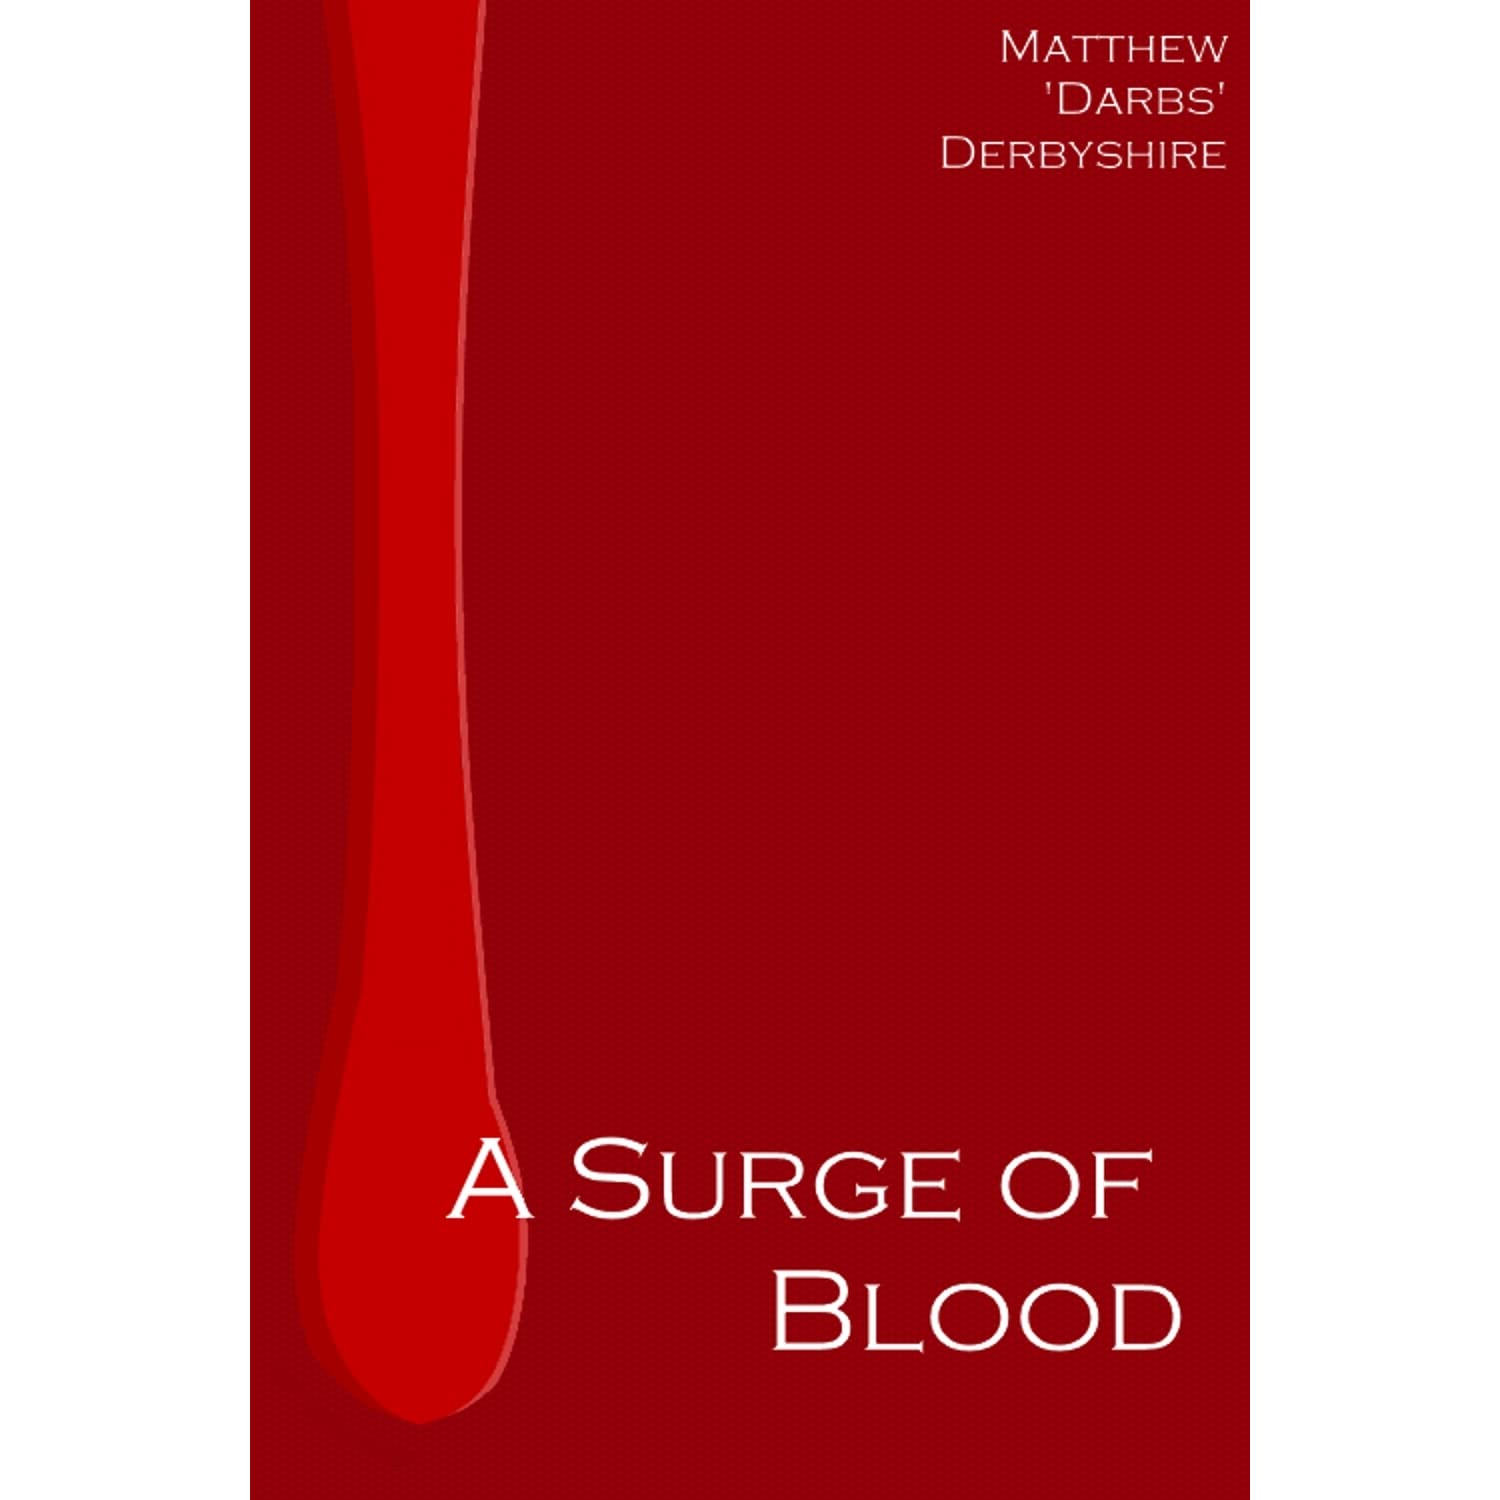 A Surge of Blood